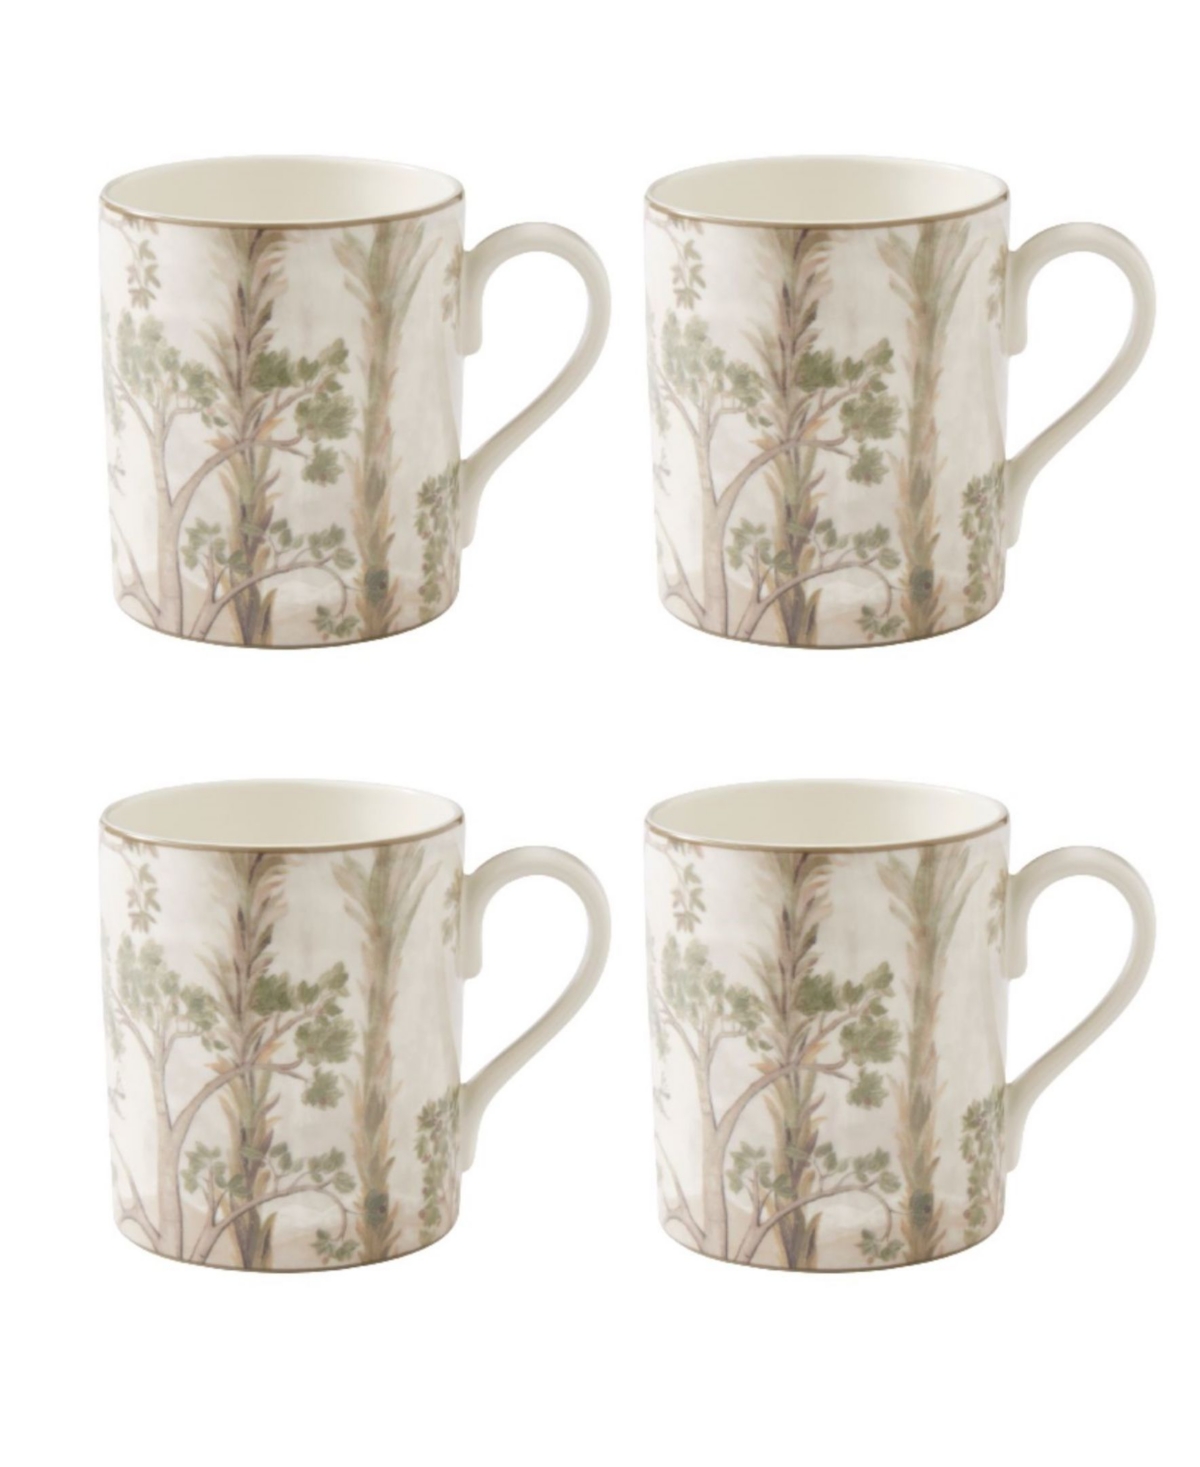 Tall Trees 4 Piece Mugs Set, Service for 4 - Assorted